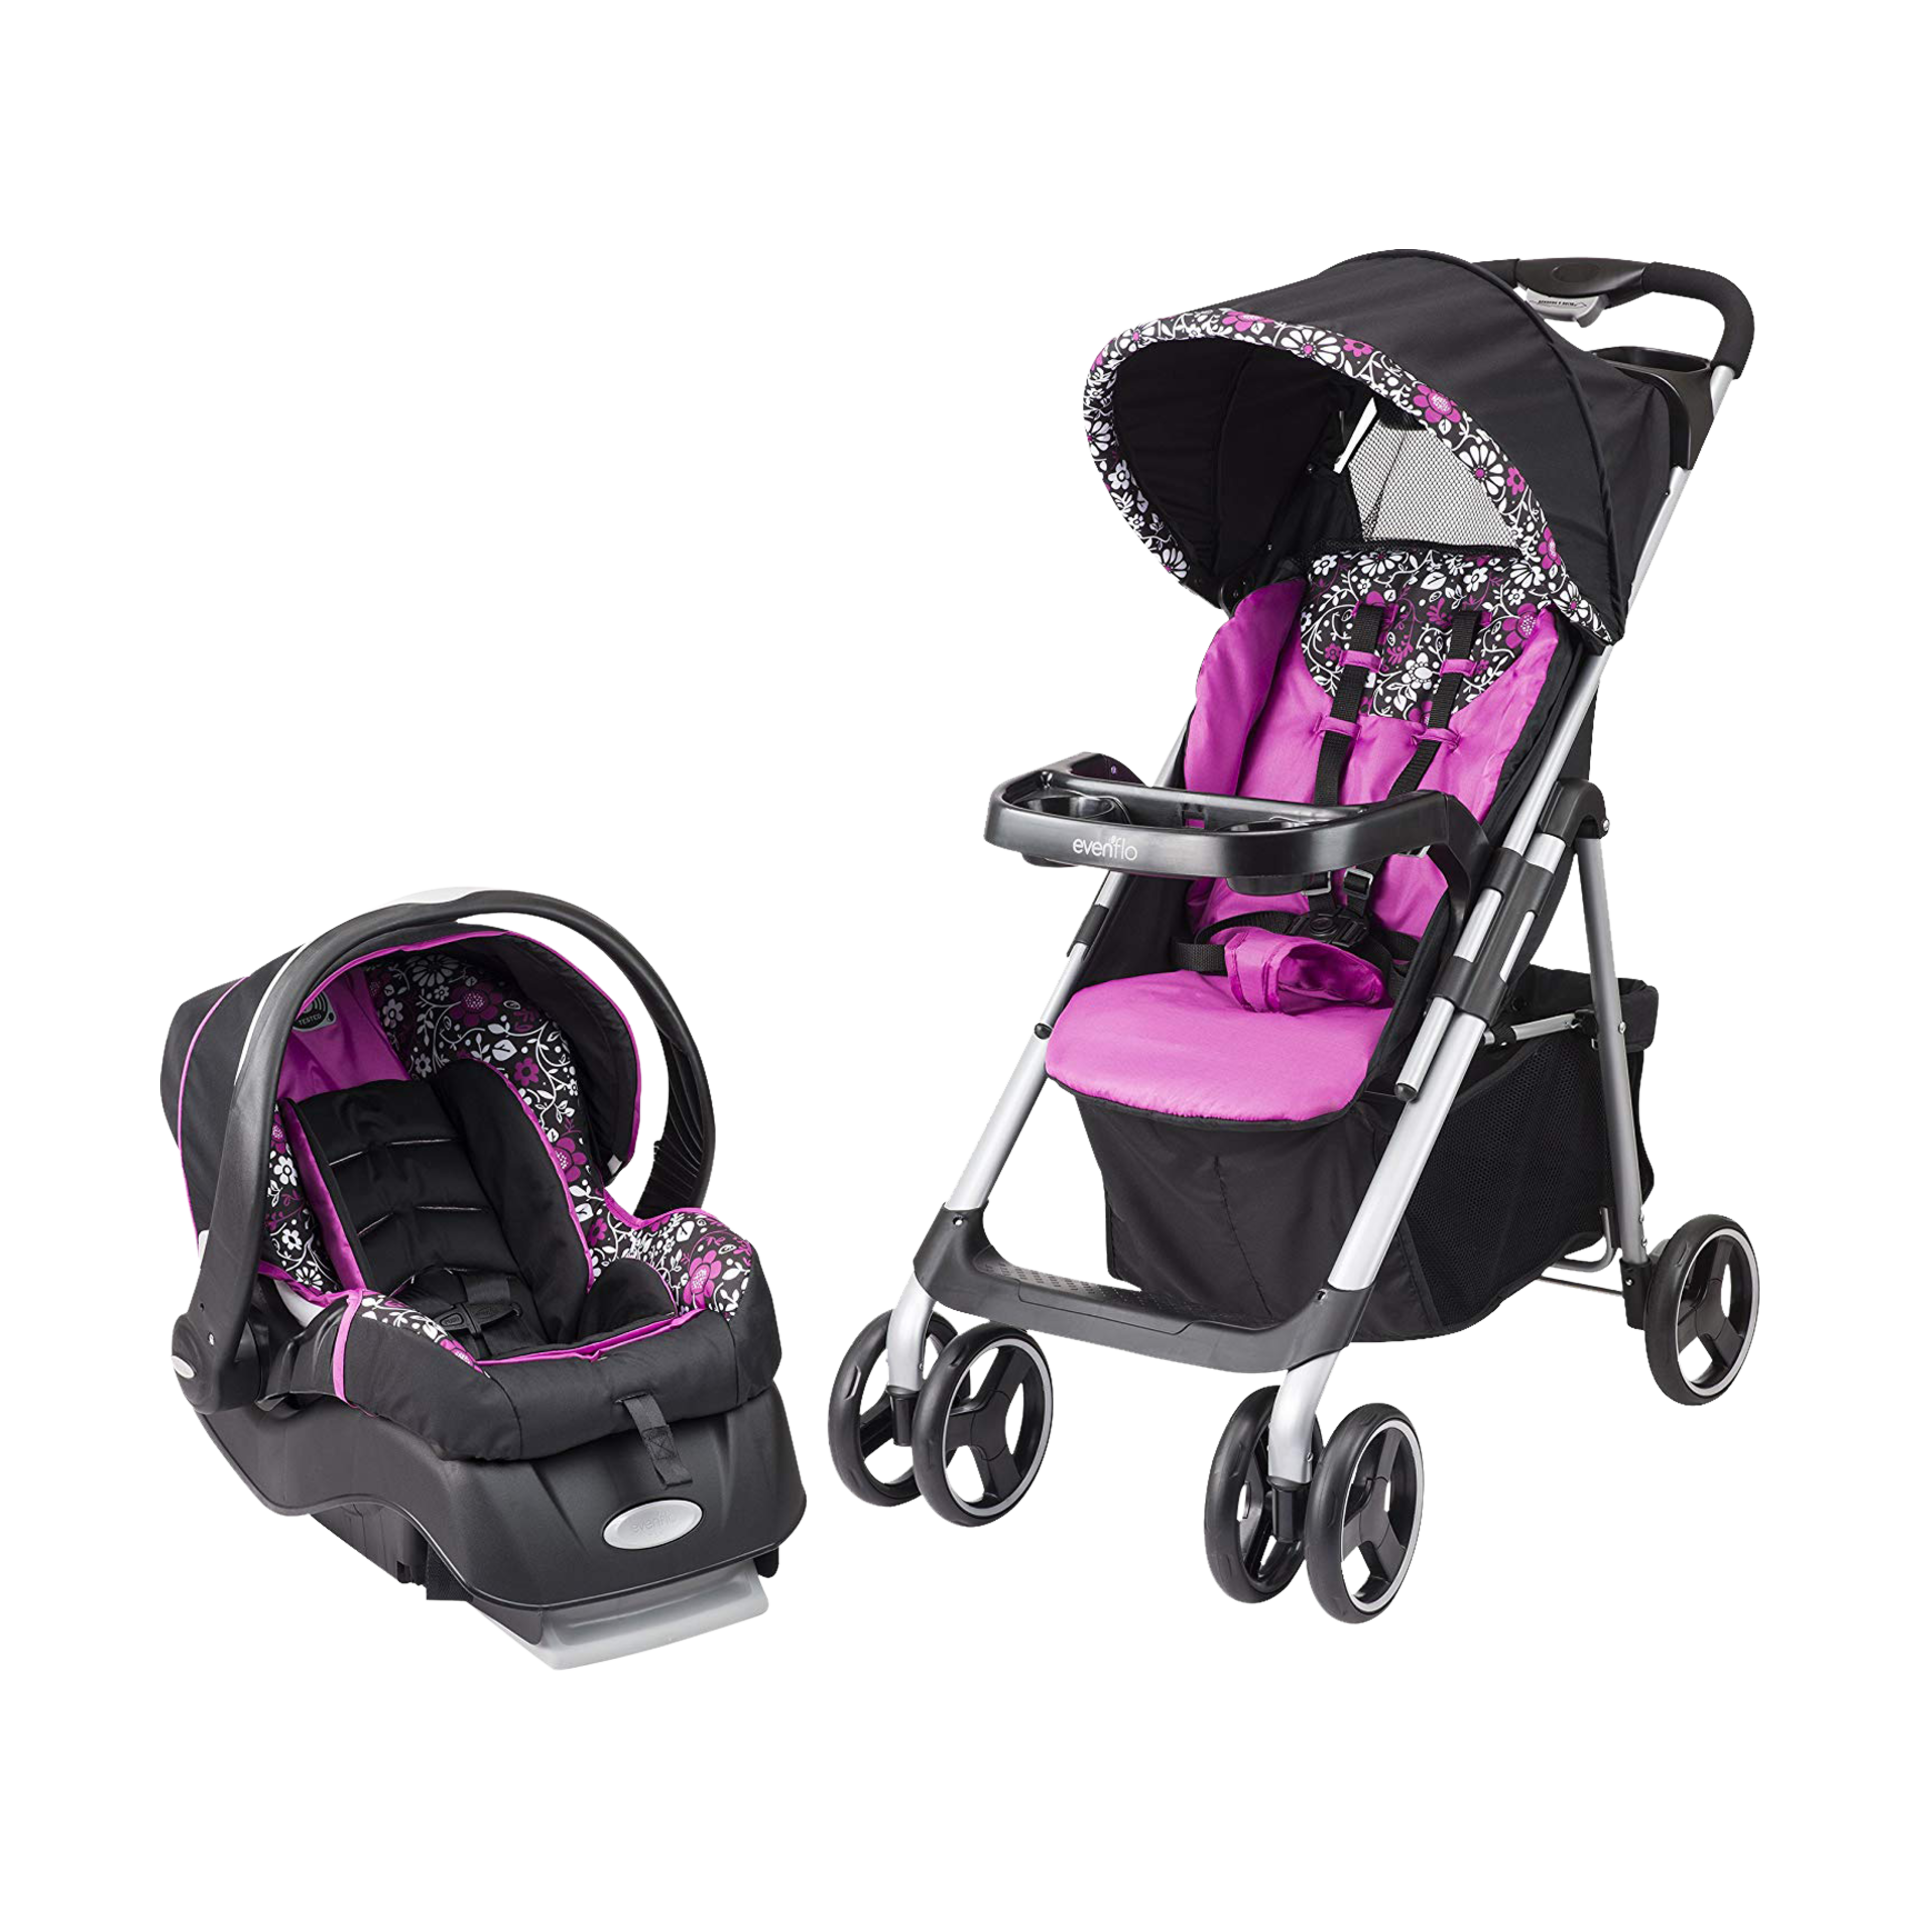 travel stroller with car seat